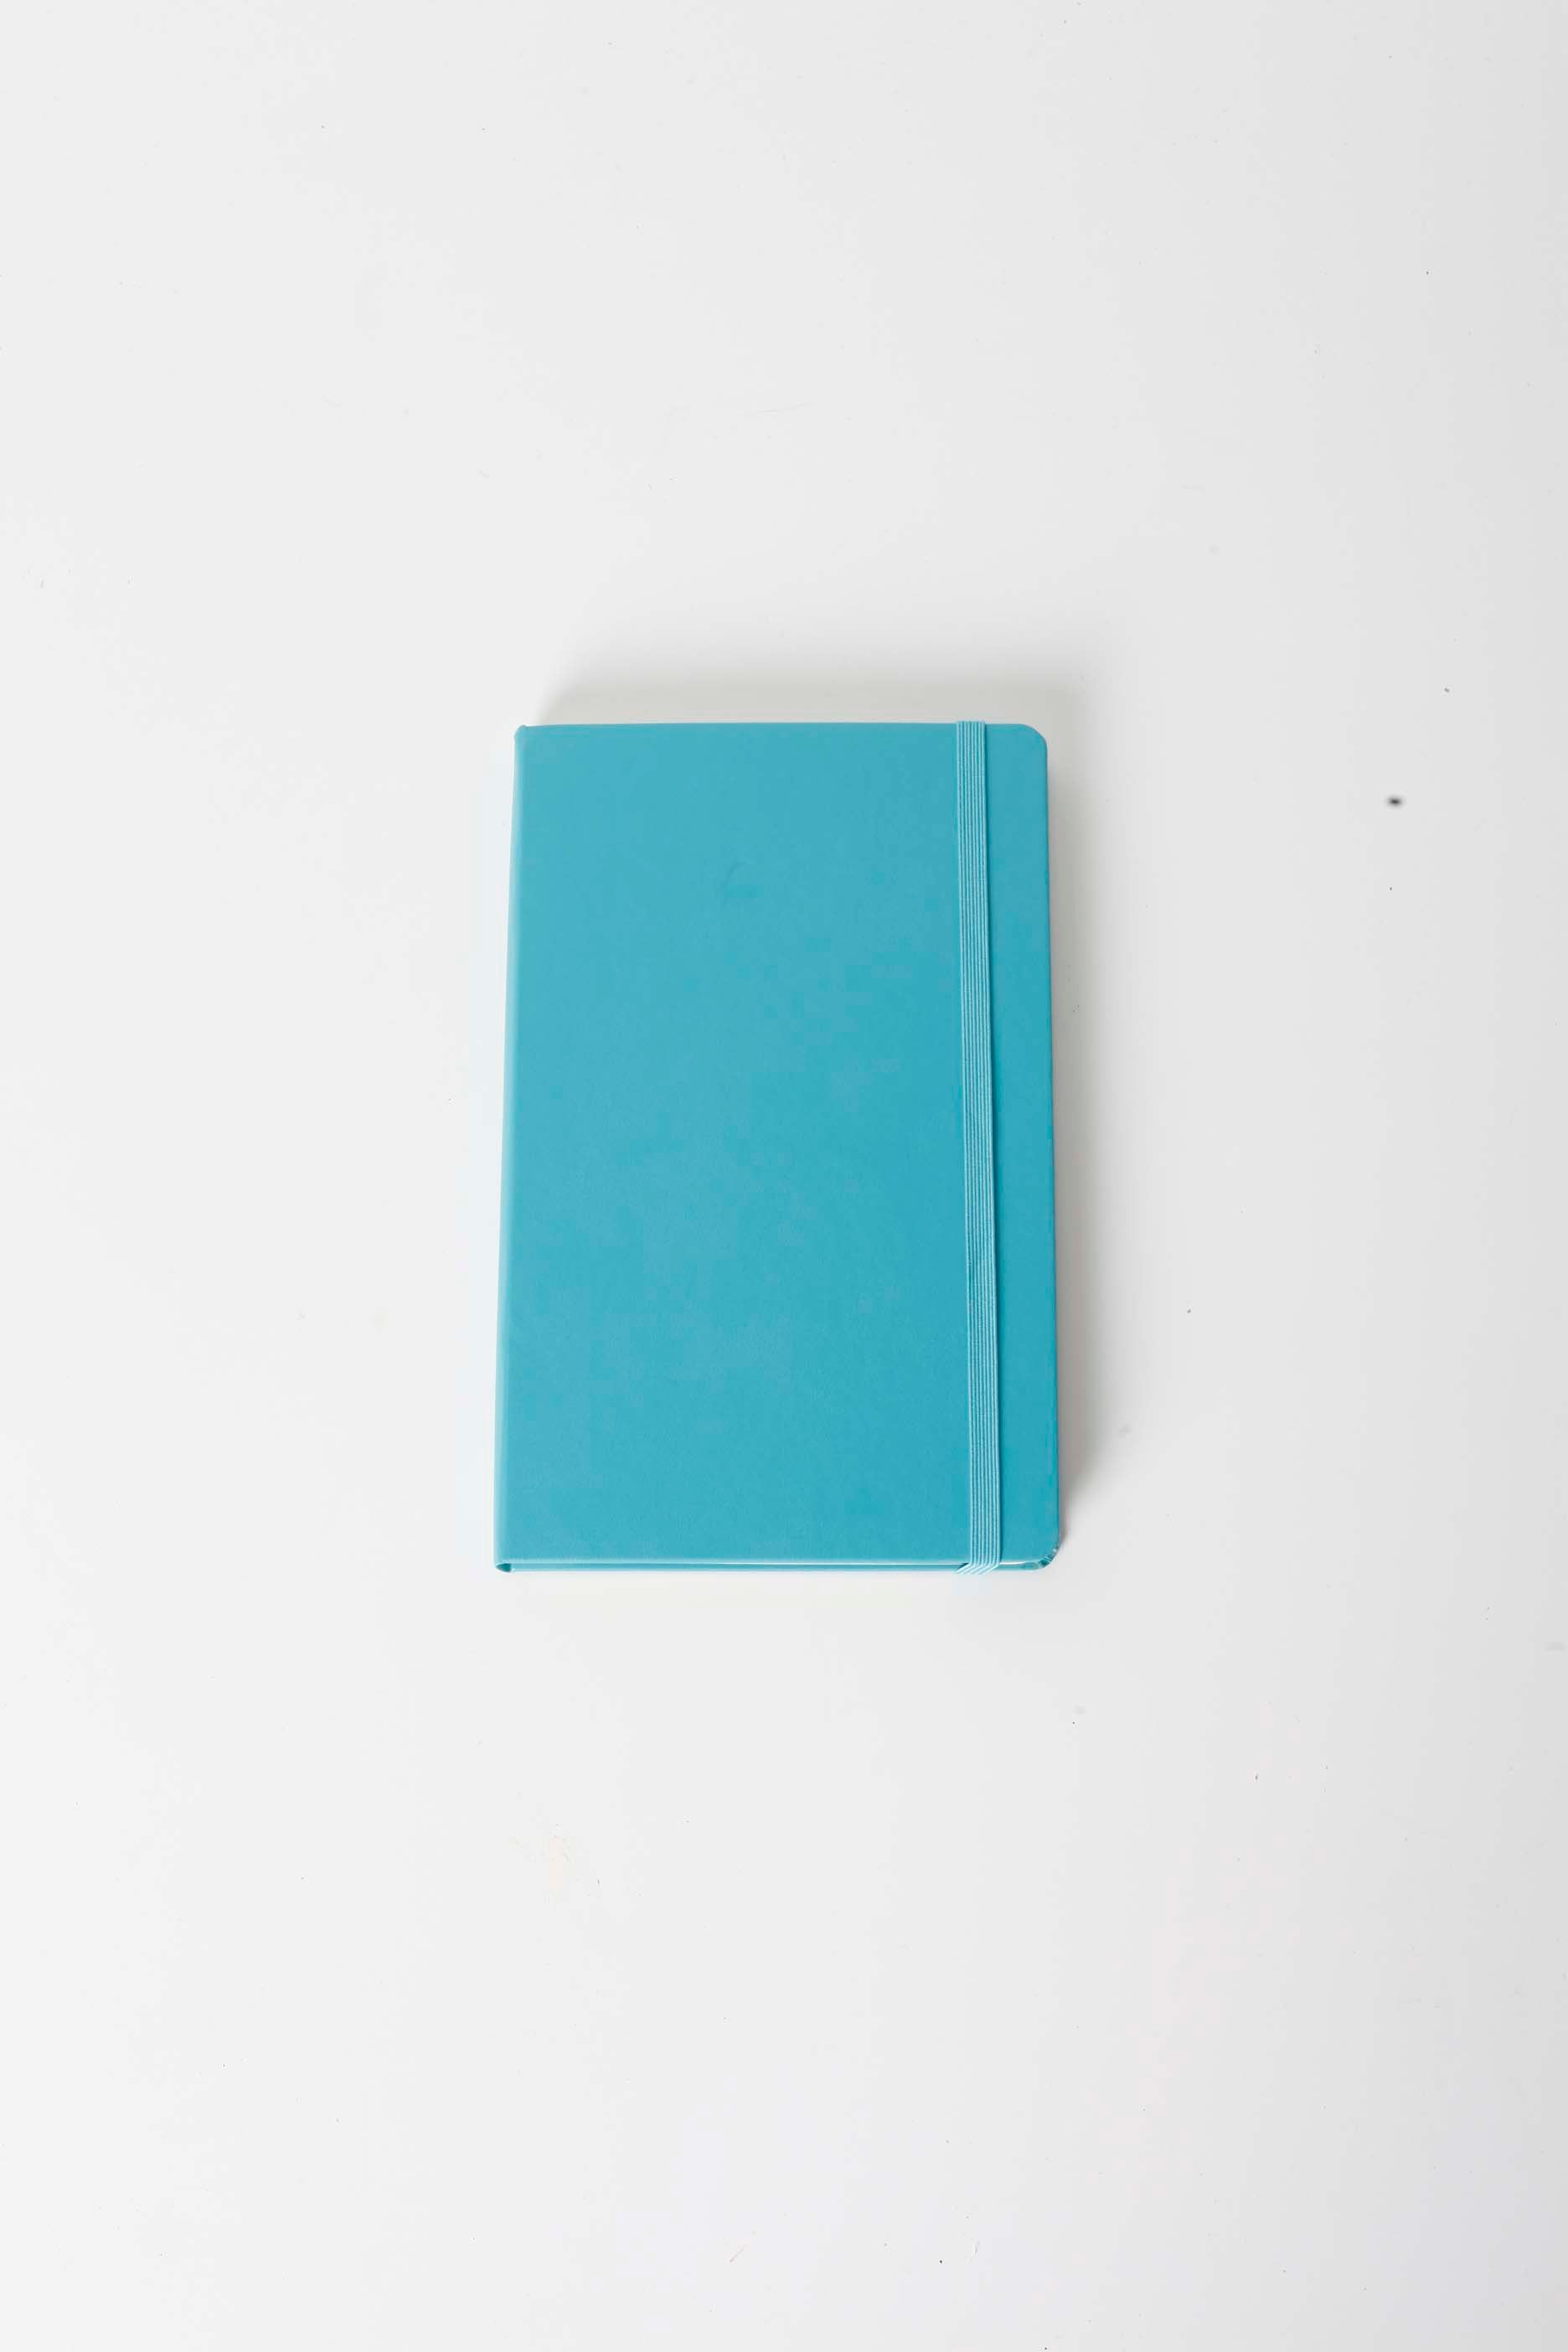 Blue Leather-Bound Notebook